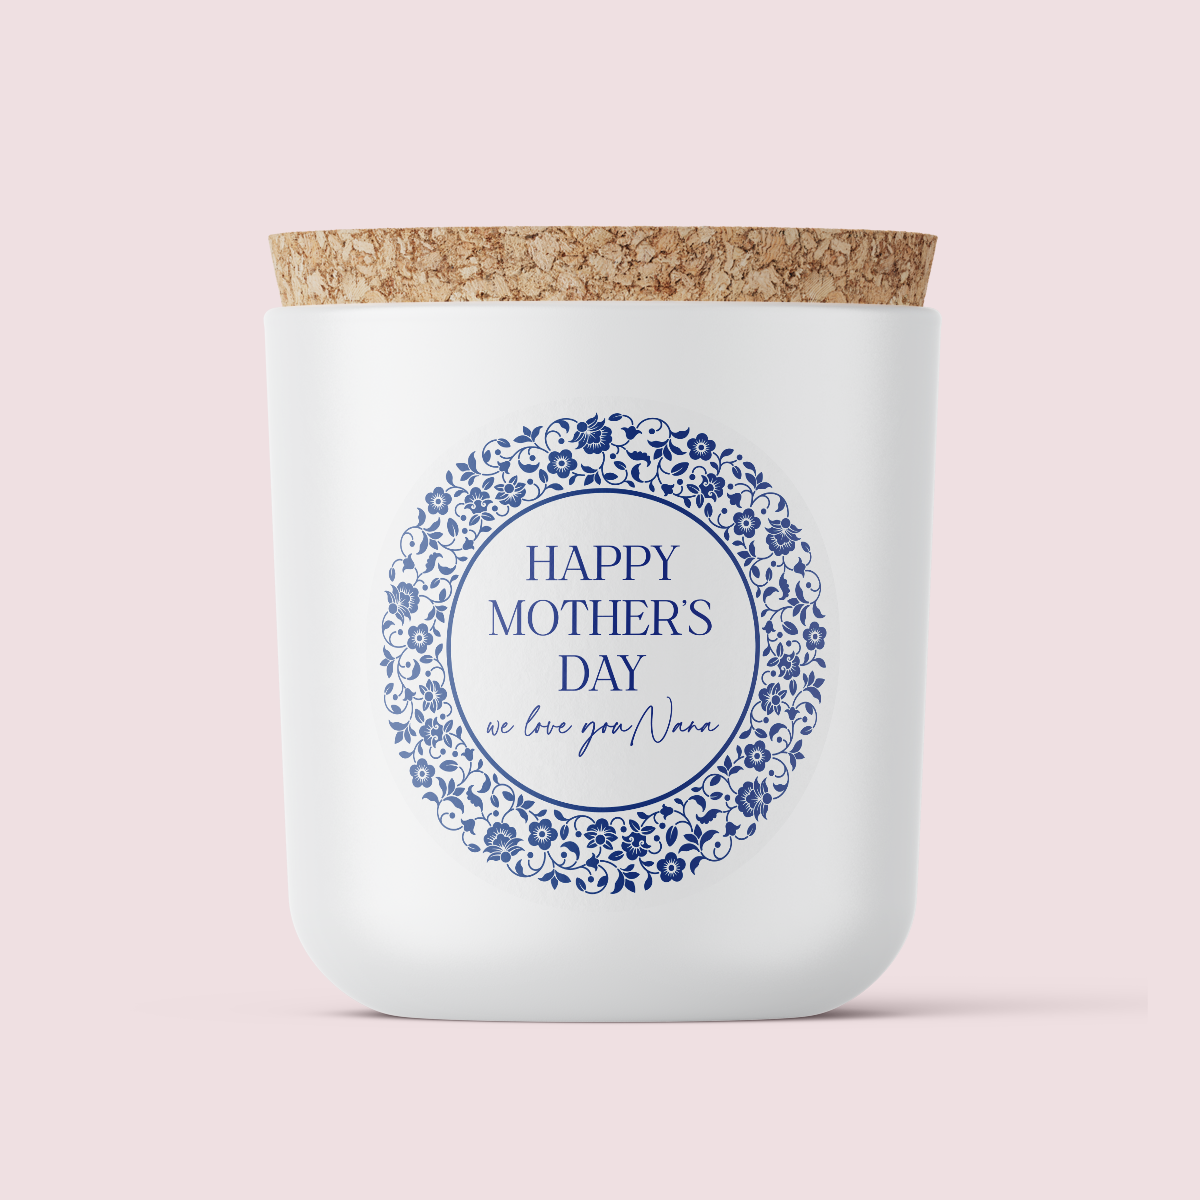 Hamptons Collection - Mother's Day - Design Three - ROUND